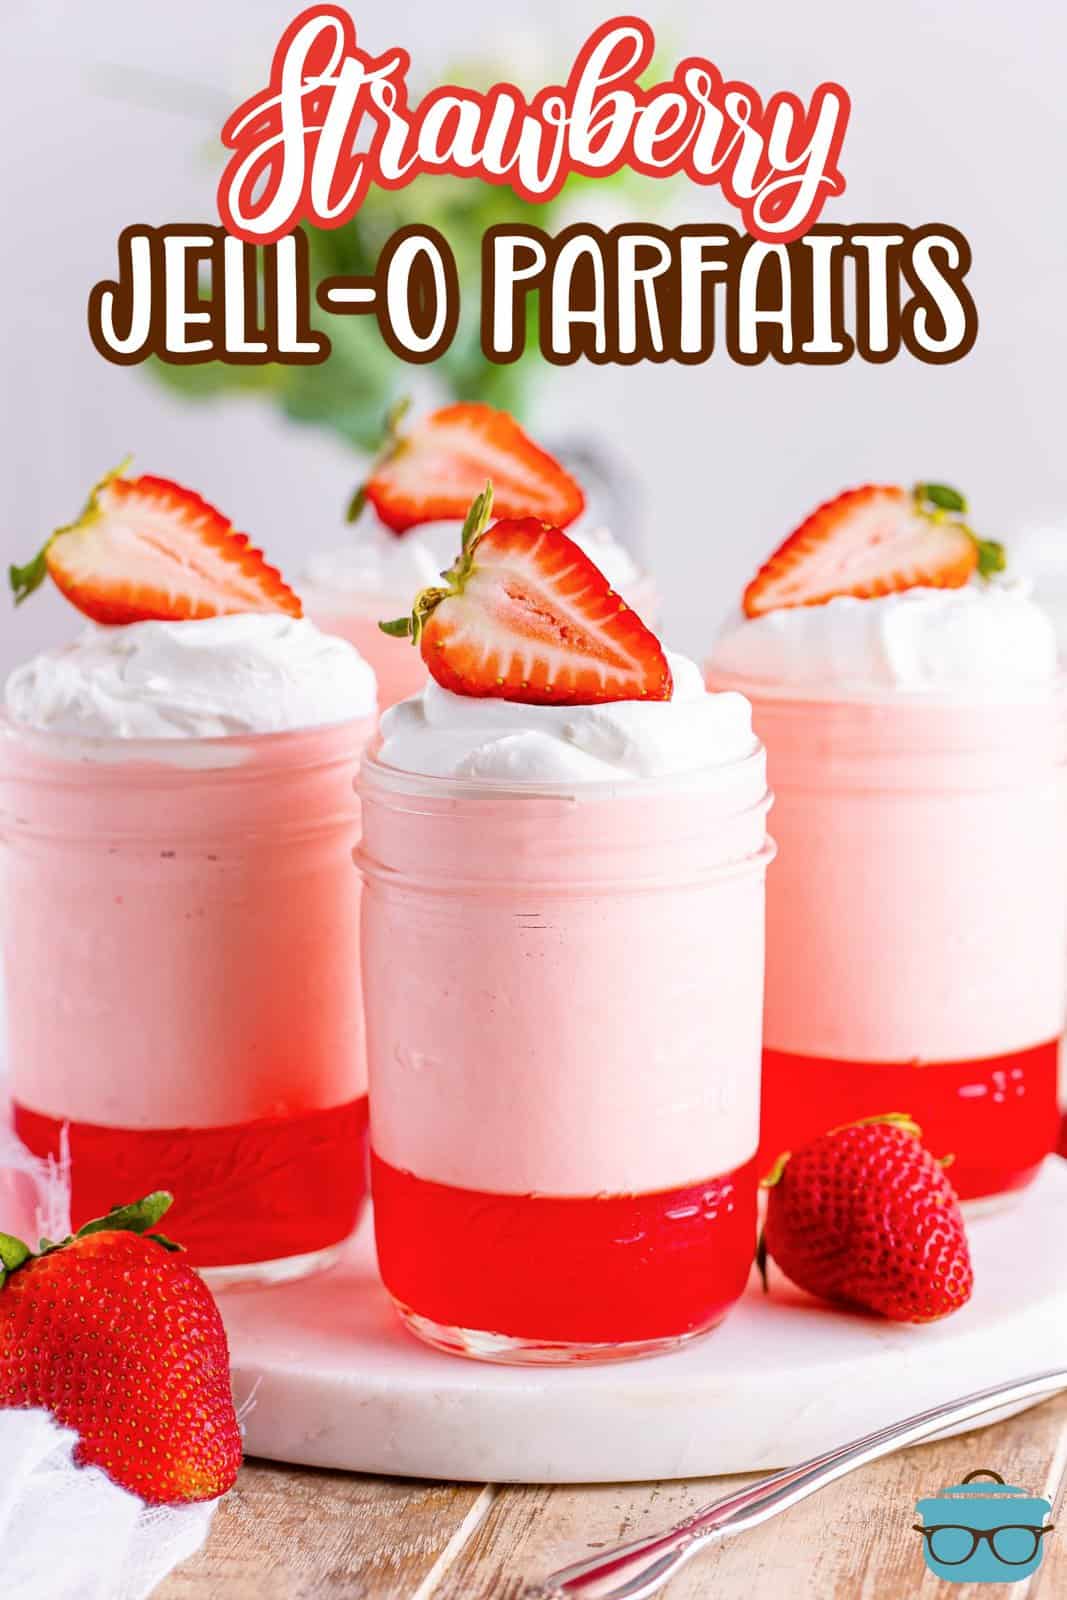 A few strawberry Jell-O parfaits sitting on a serving tray.